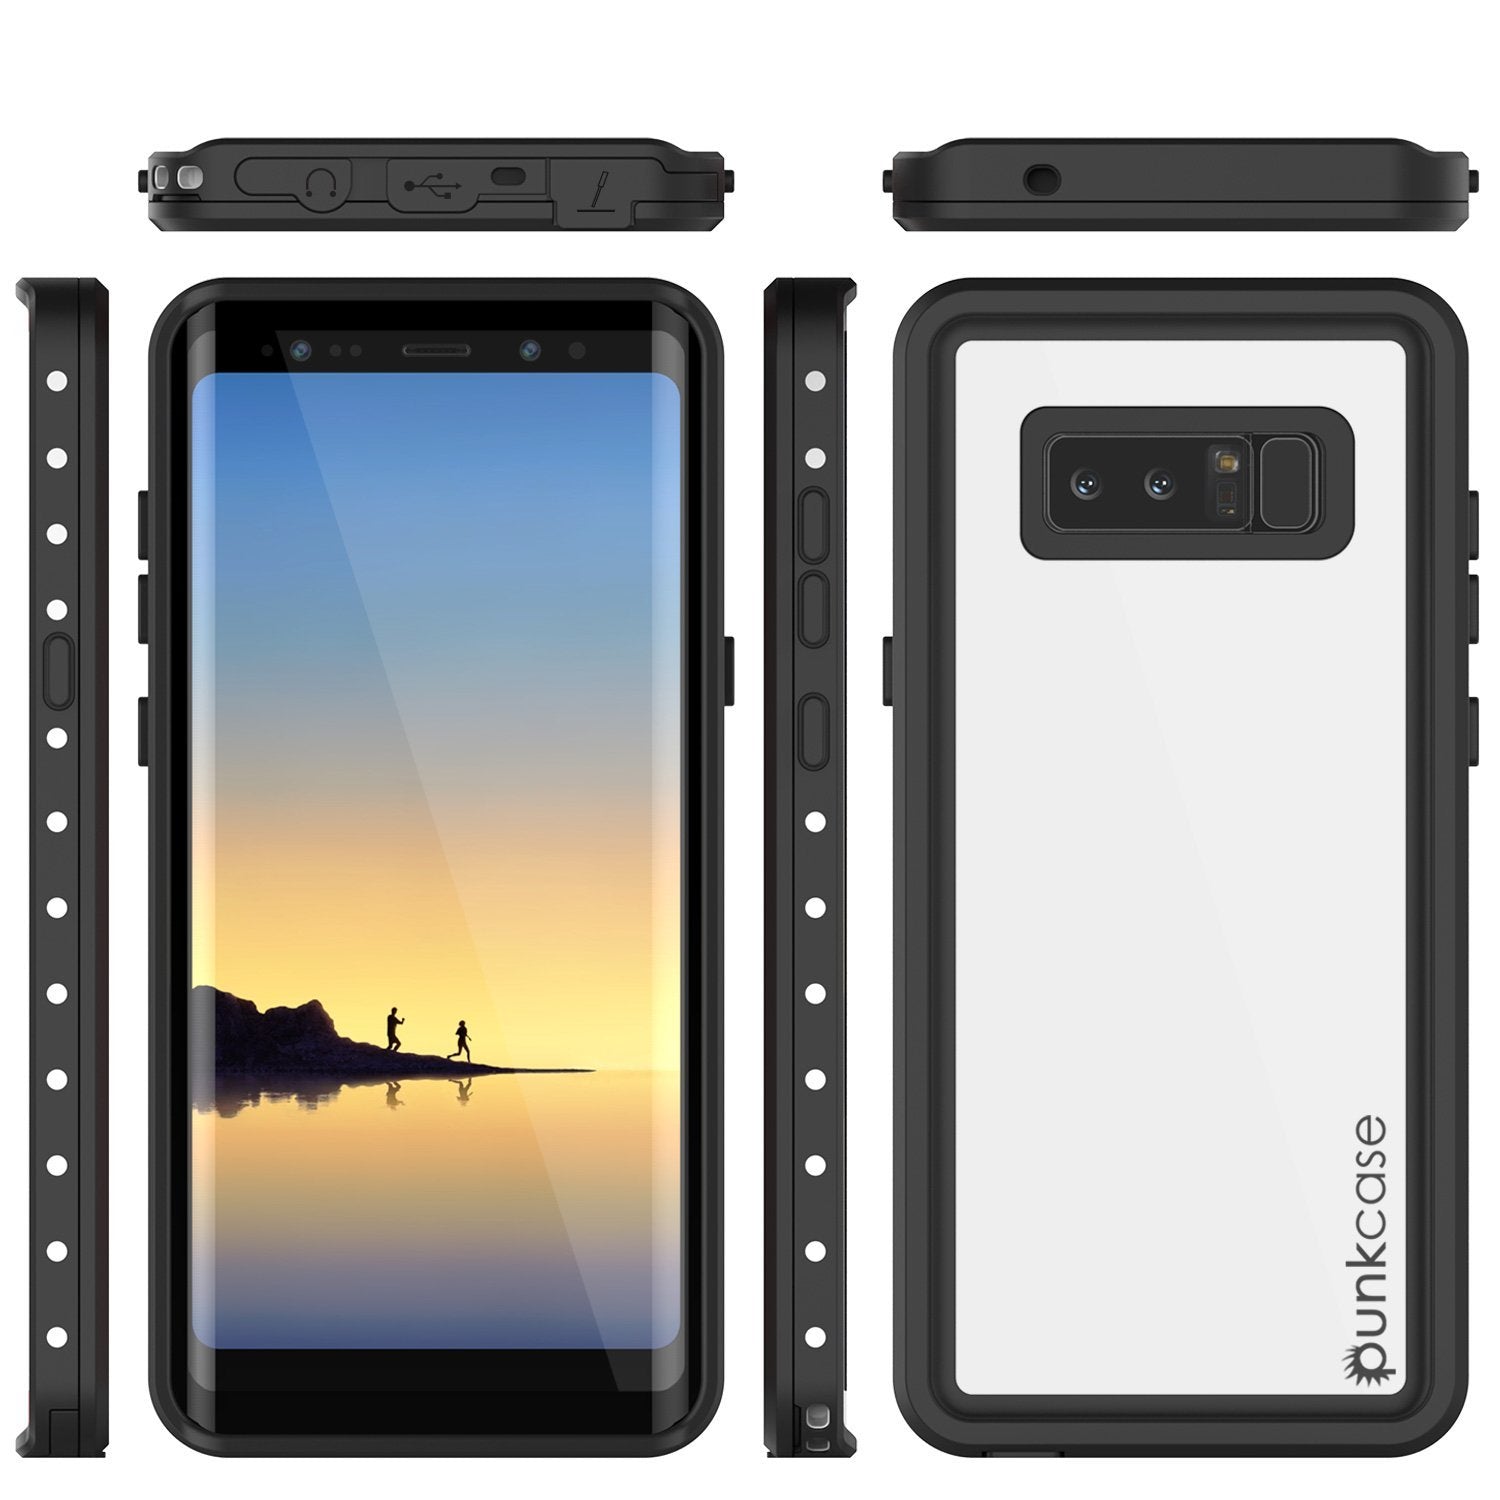 Galaxy Note 8 Waterproof Punkcase, StudStar Series Armor Cover [WHITE]